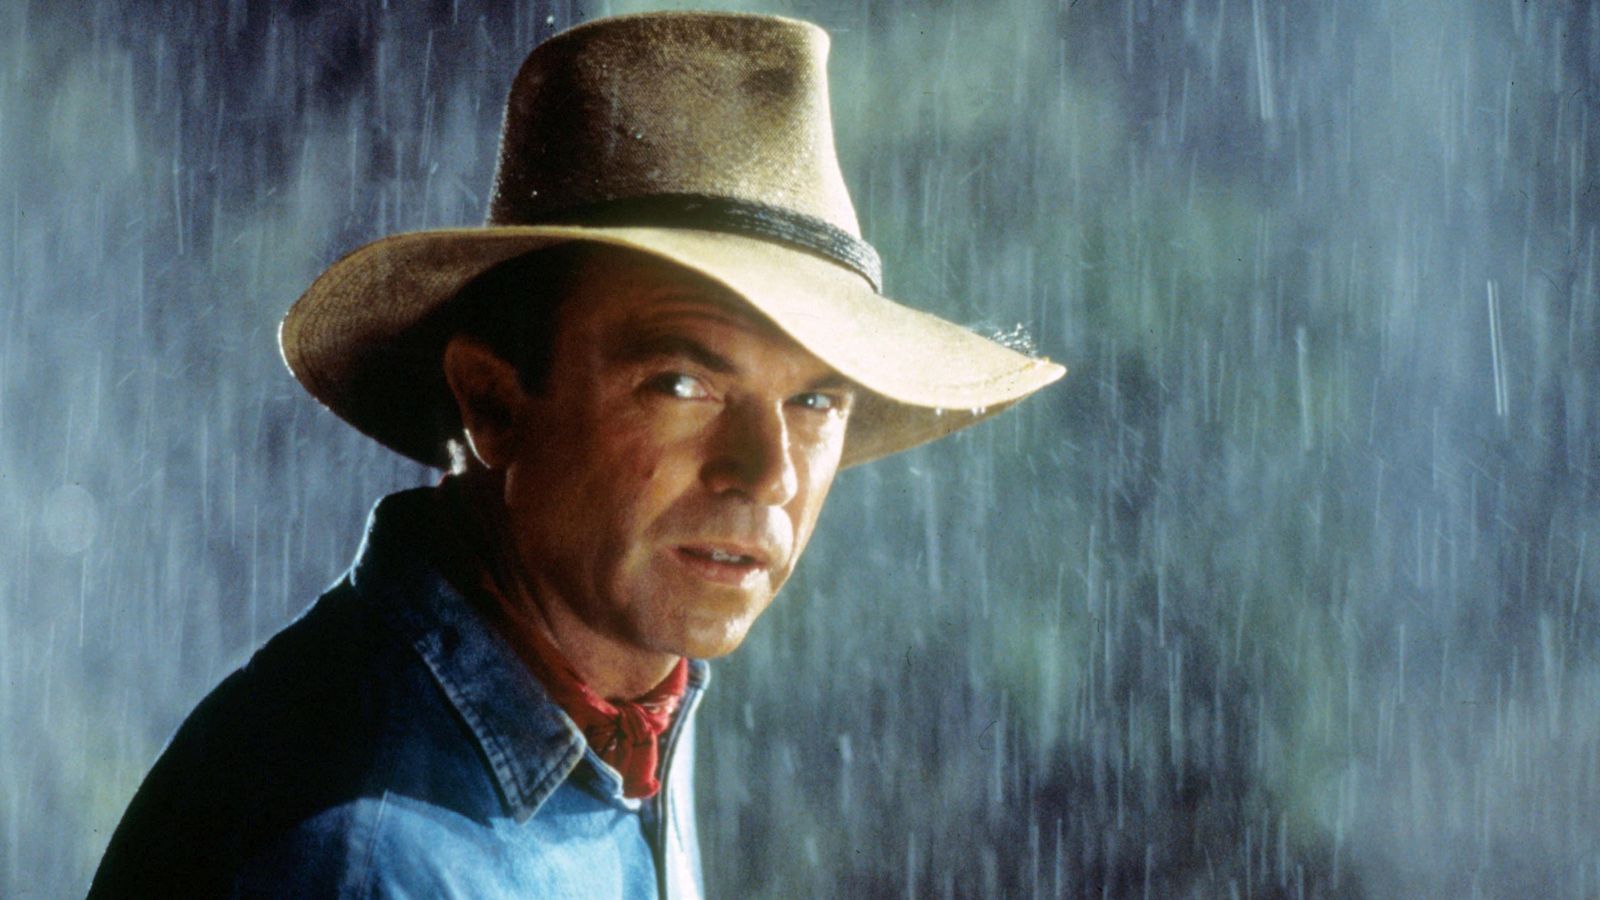 Jurassic Park star Sam Neill reveals he has been treated for blood cancer